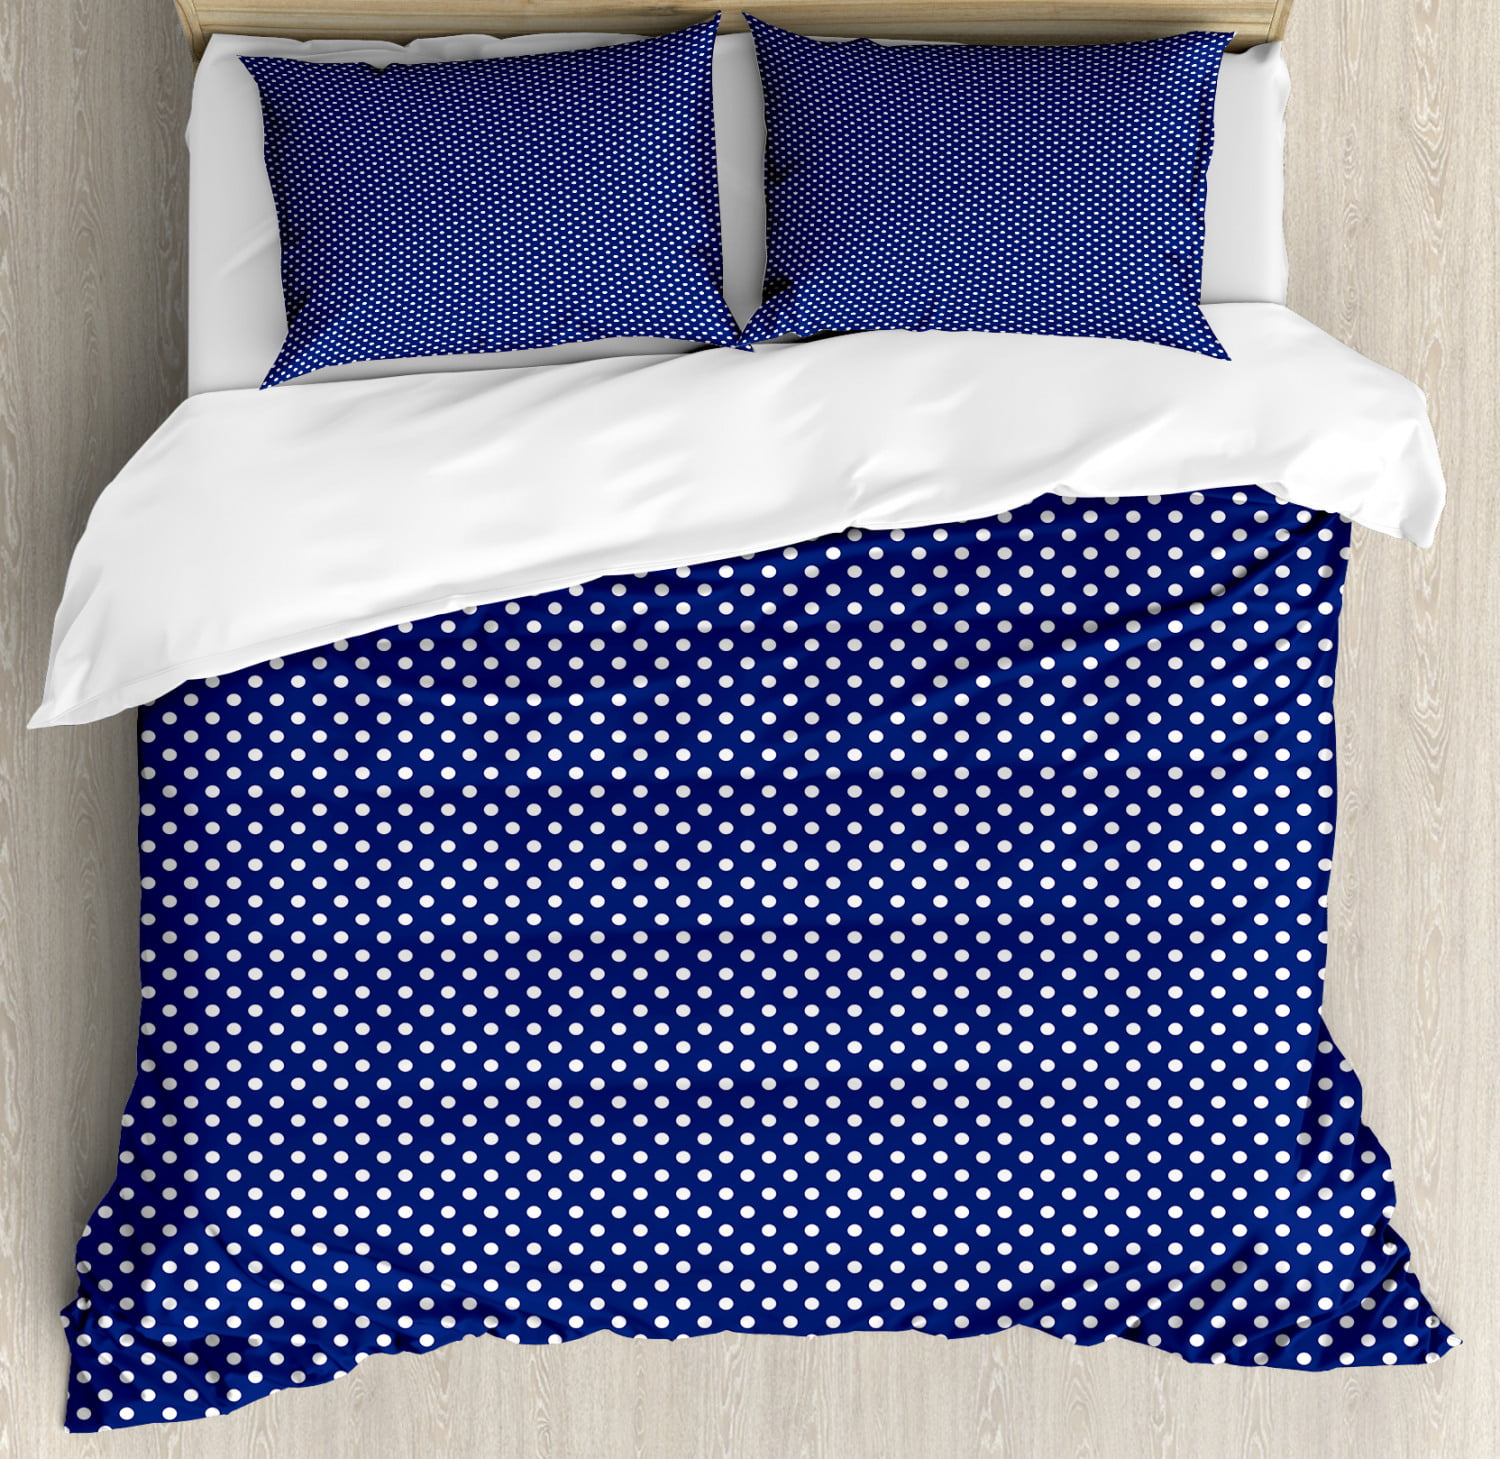 Navy Blue Duvet Cover Set Old Fashioned Polka Dots Pattern In